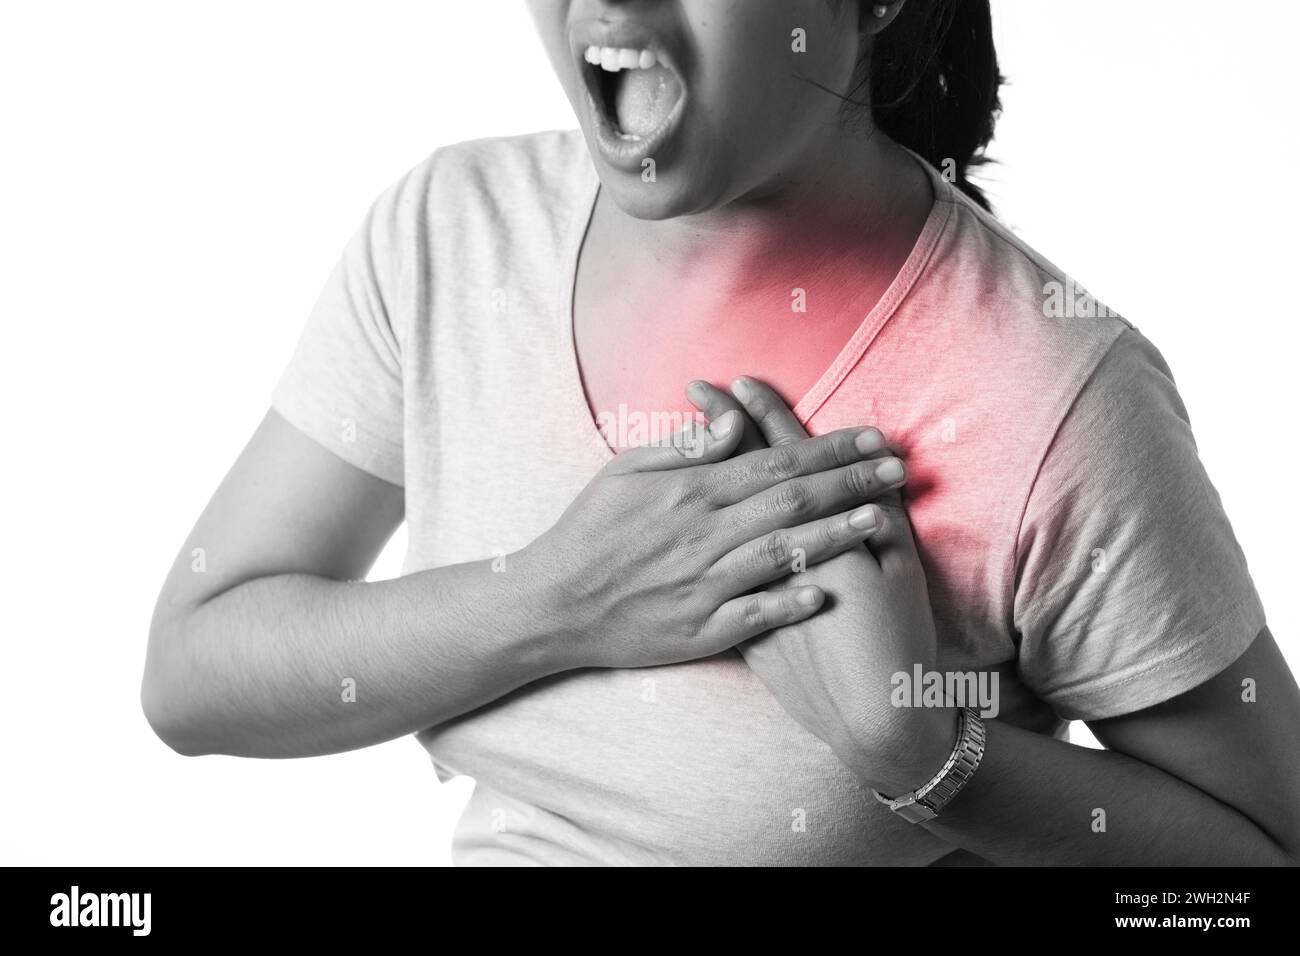 An Indian woman holding her chest for pain showing painful expression on white background Stock Photo